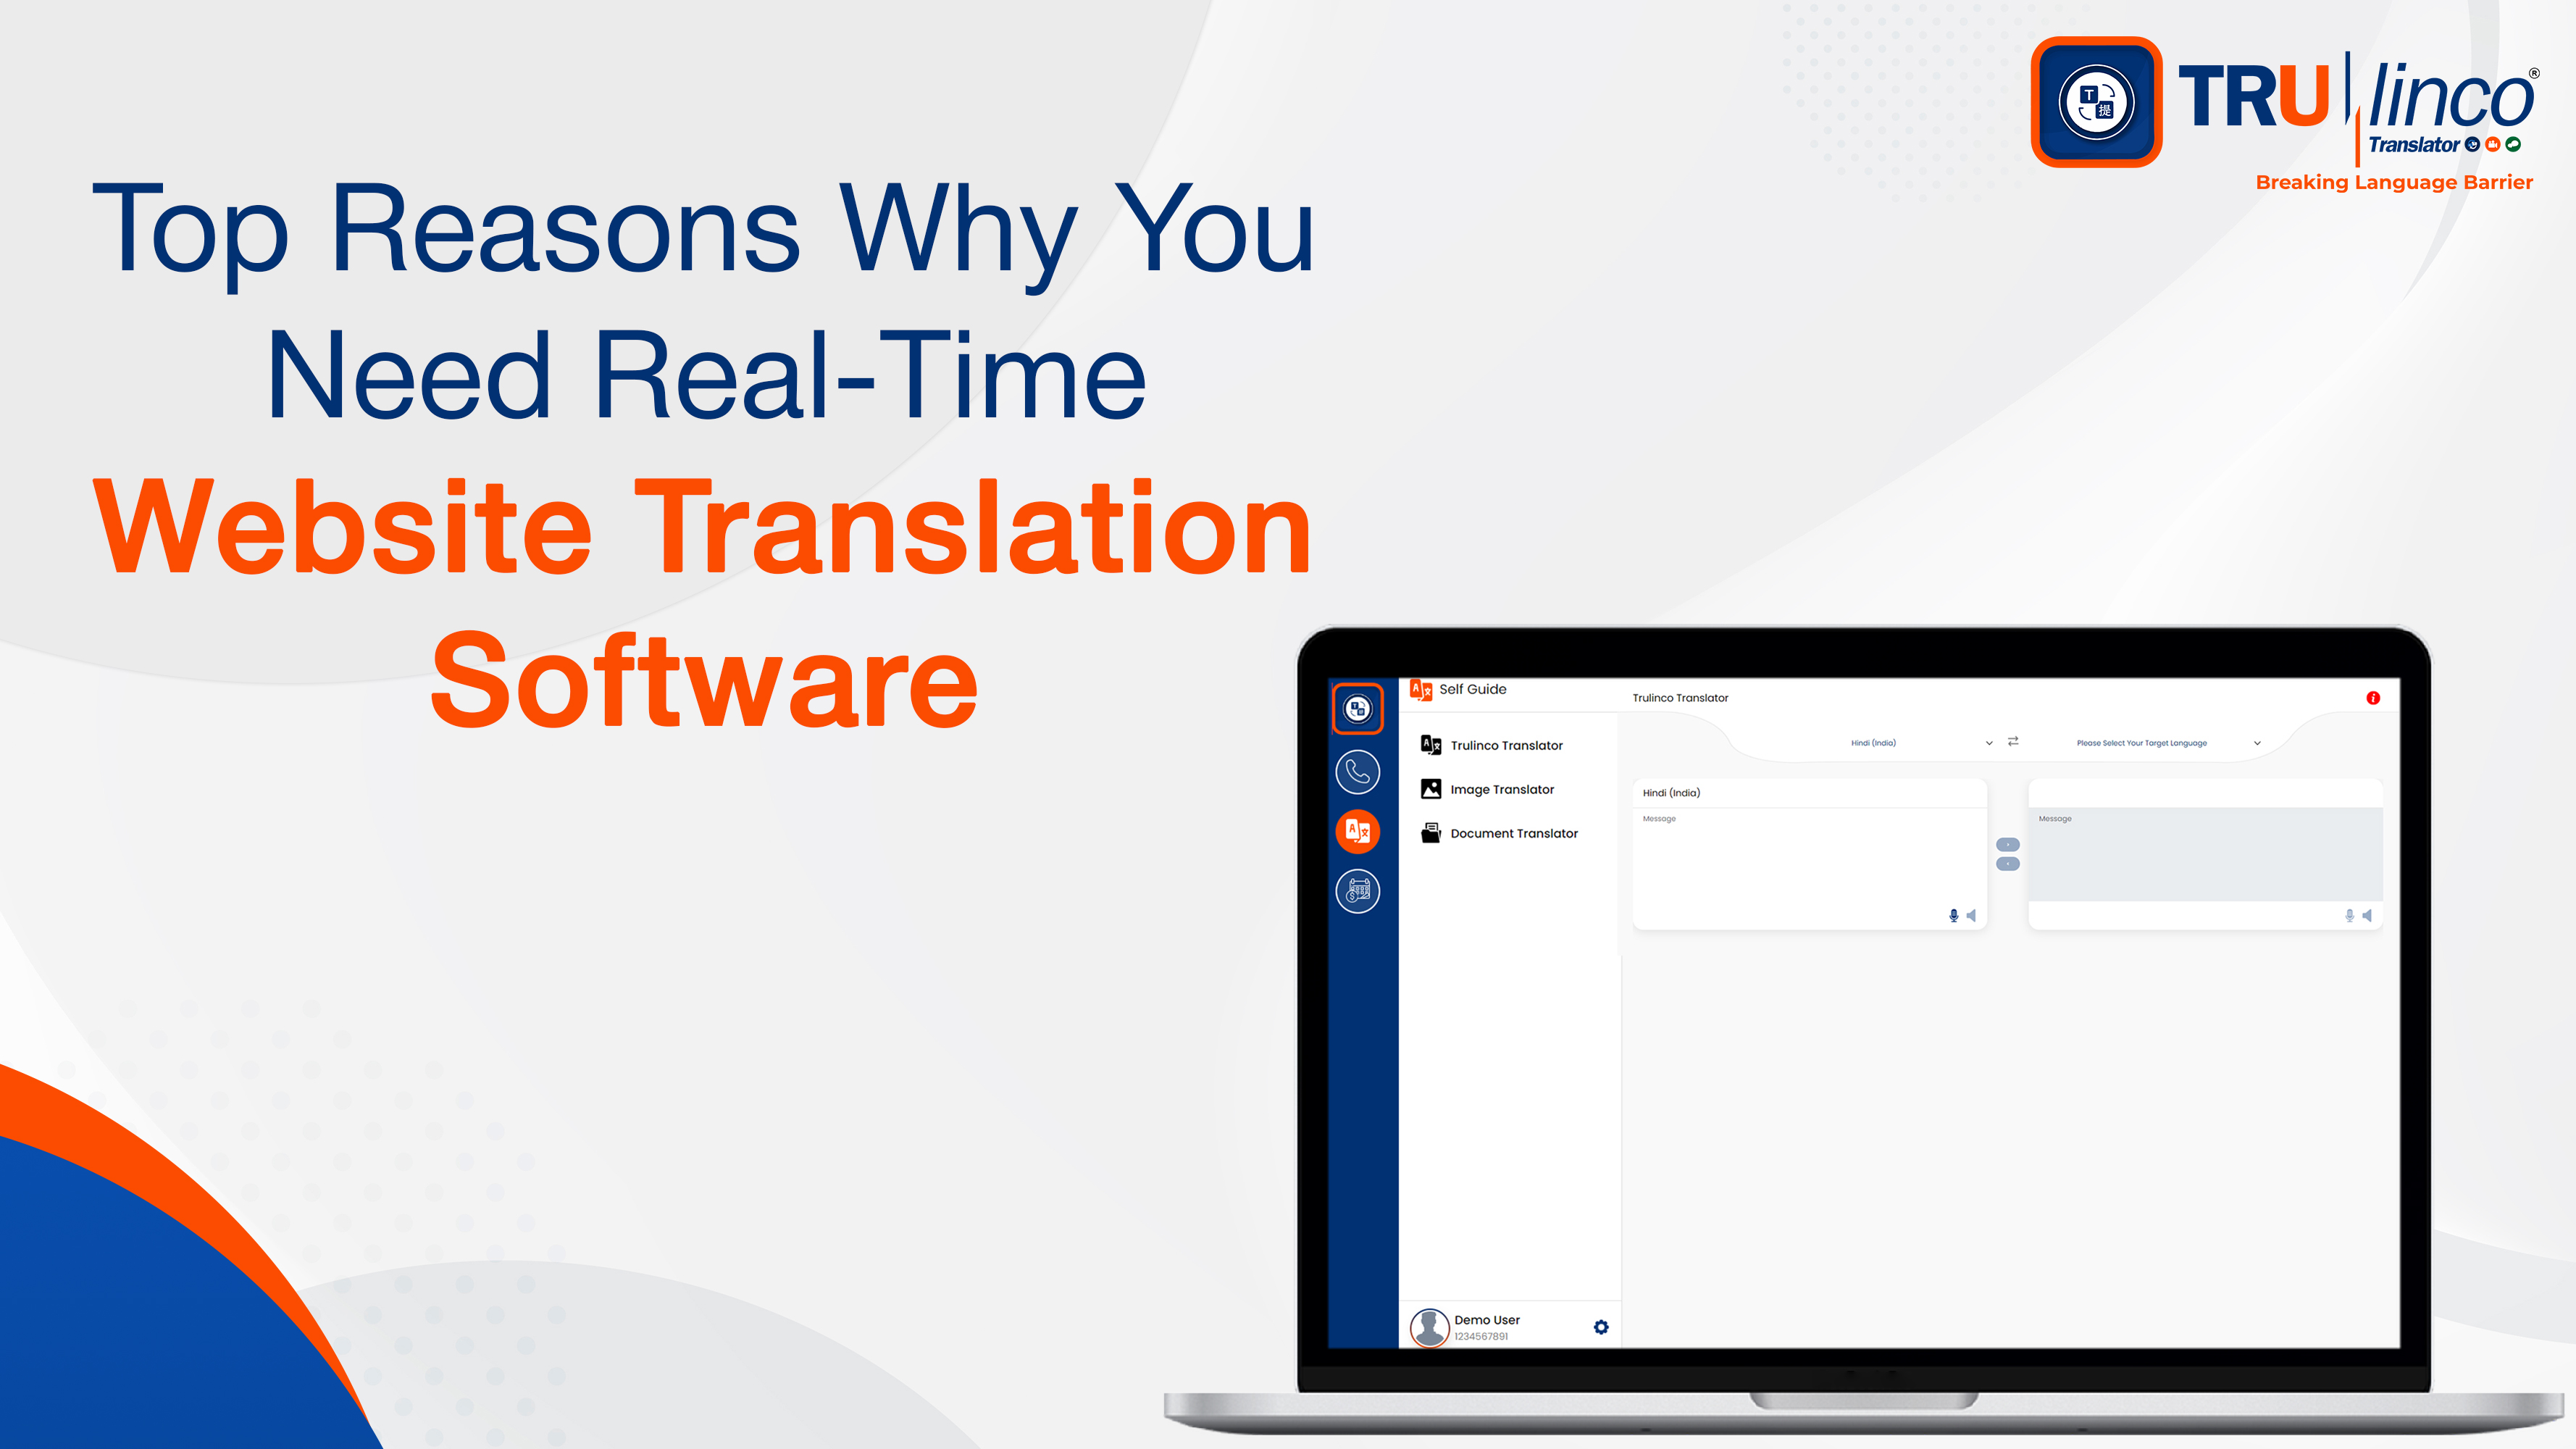 Top Reasons Why You Need Real-Time Website Translation Software